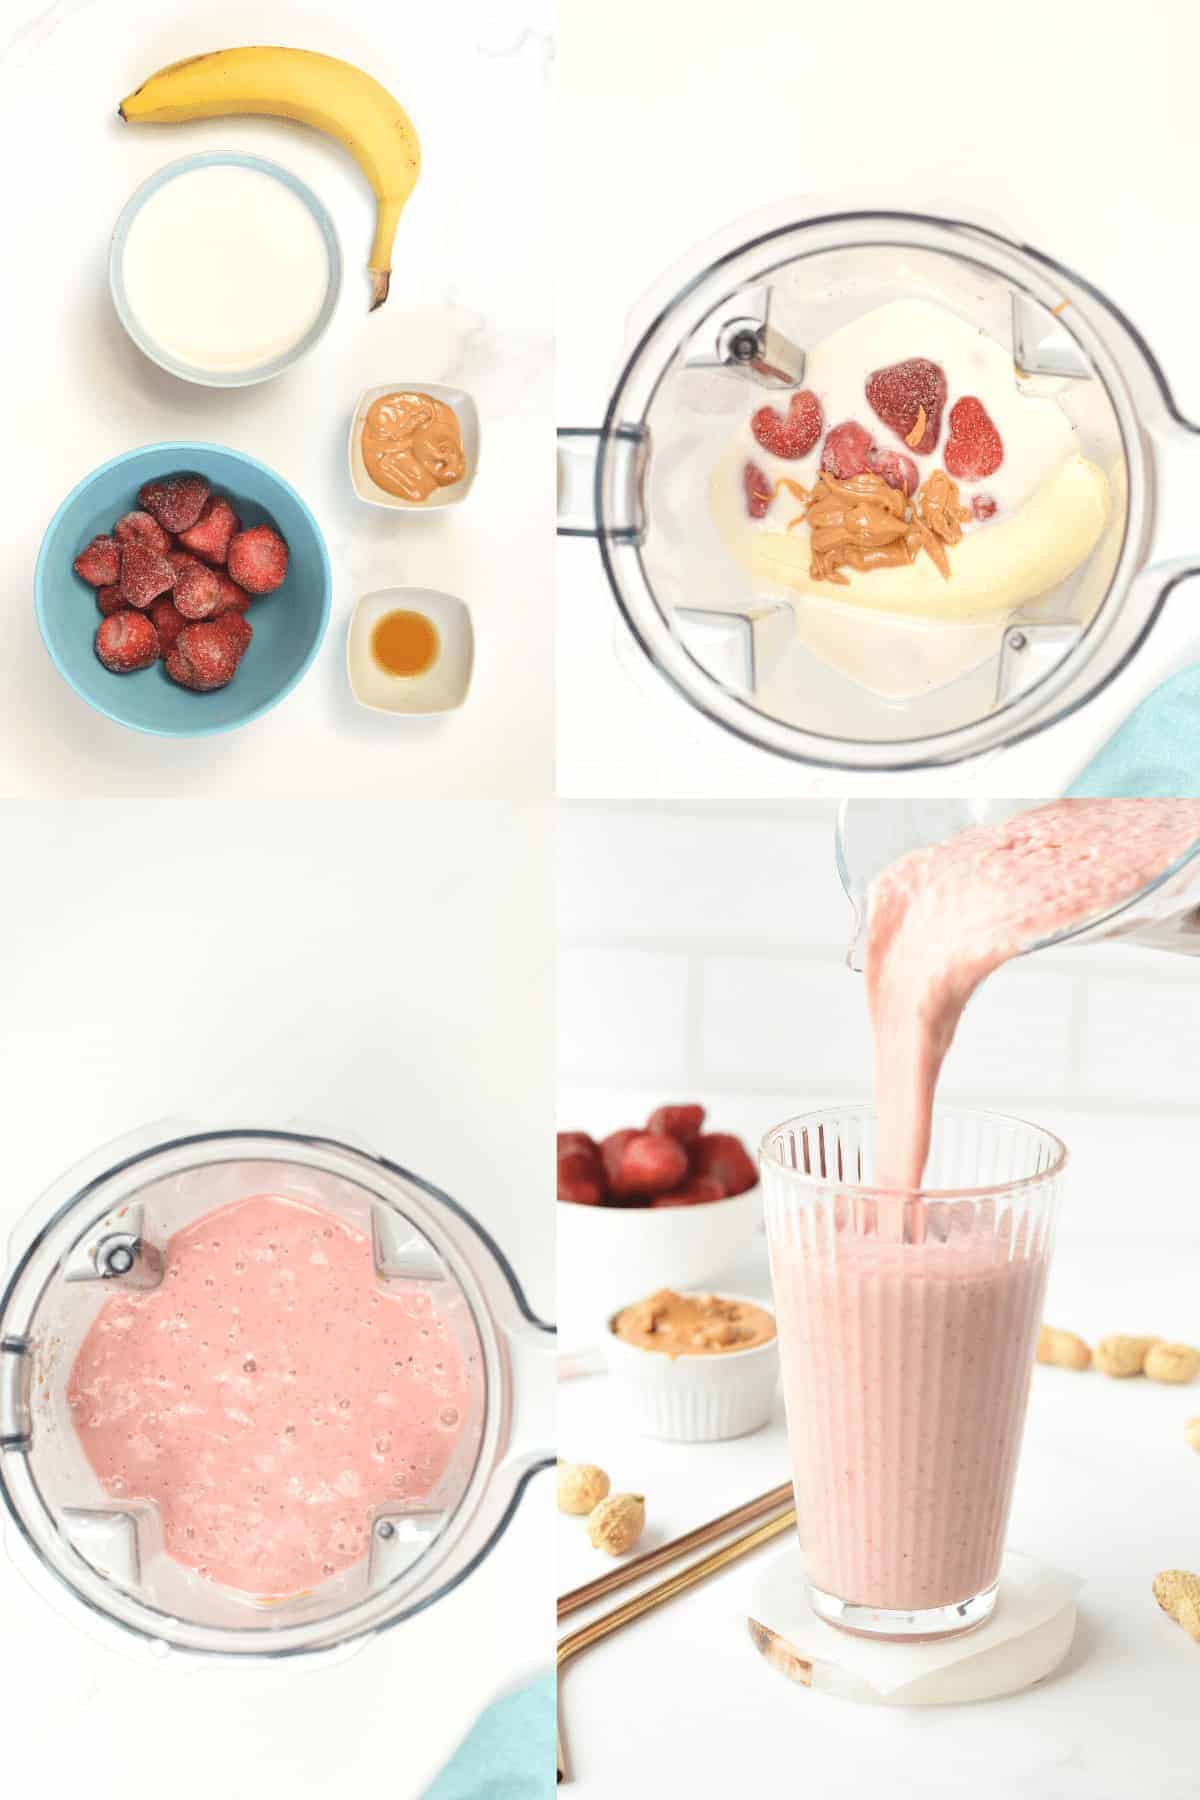 How to make Strawberry Peanut Butter Smoothie